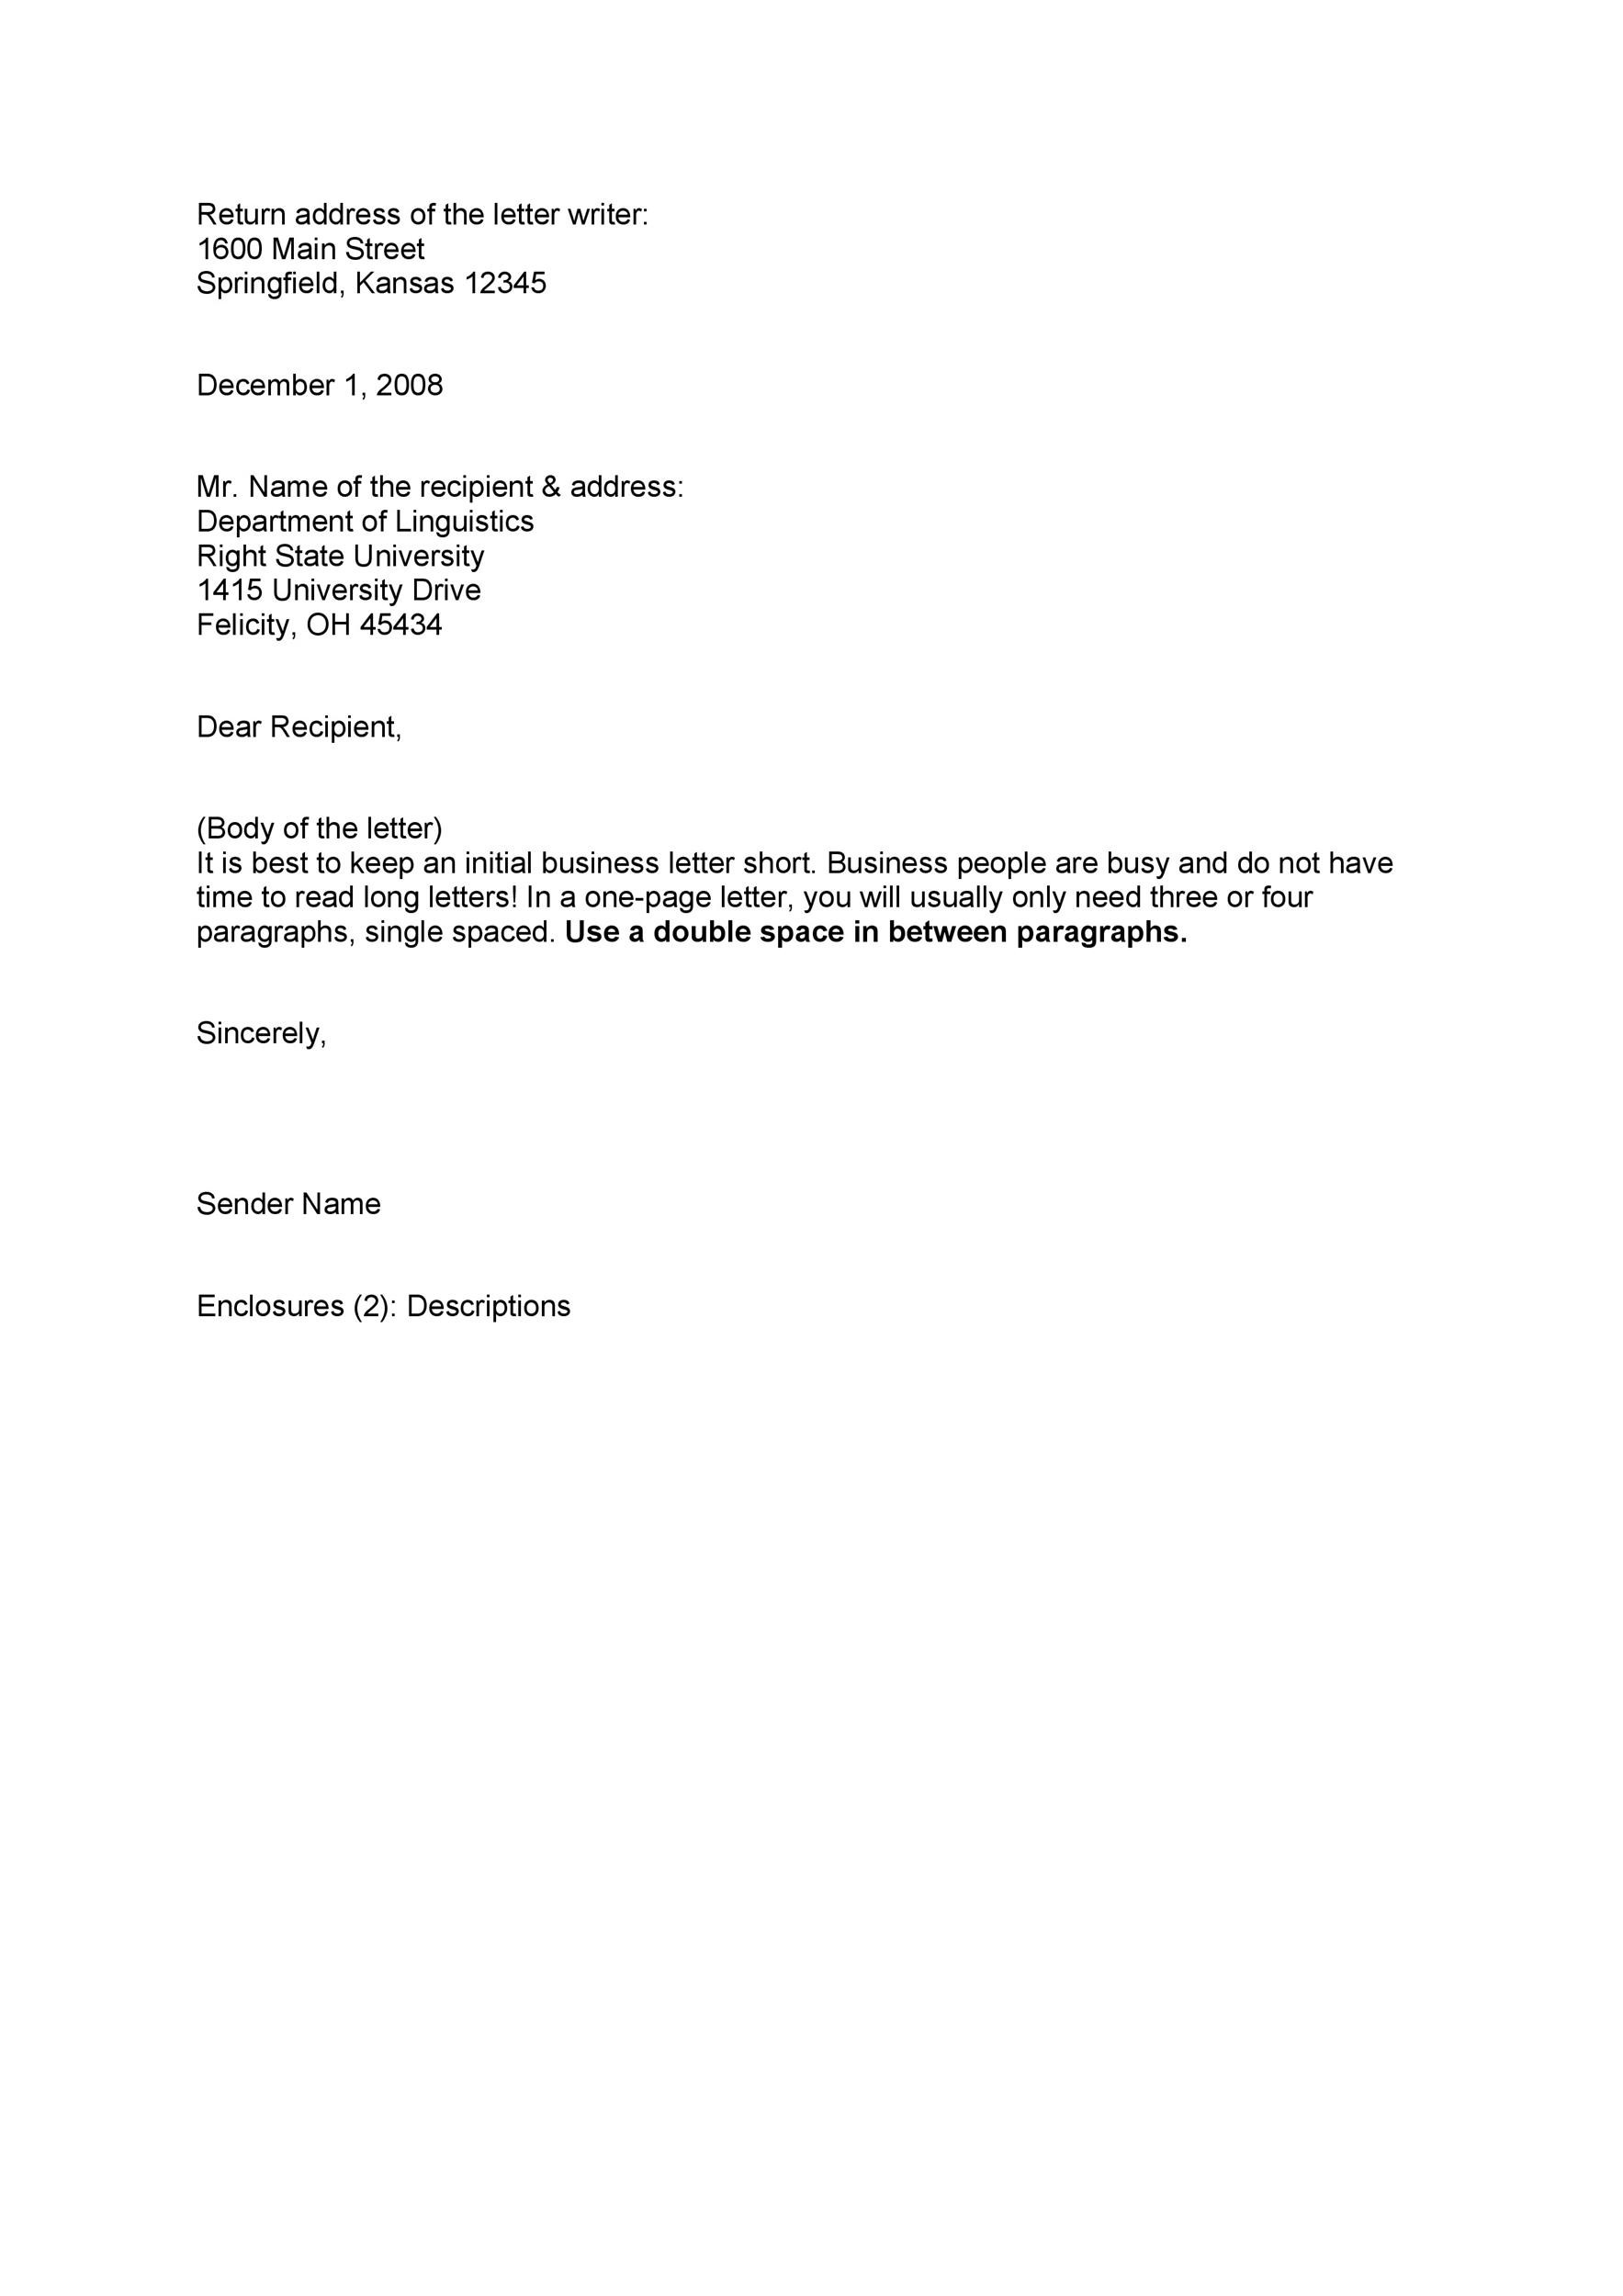 60 Samples of Business Letter Format to Write a Perfect Letter